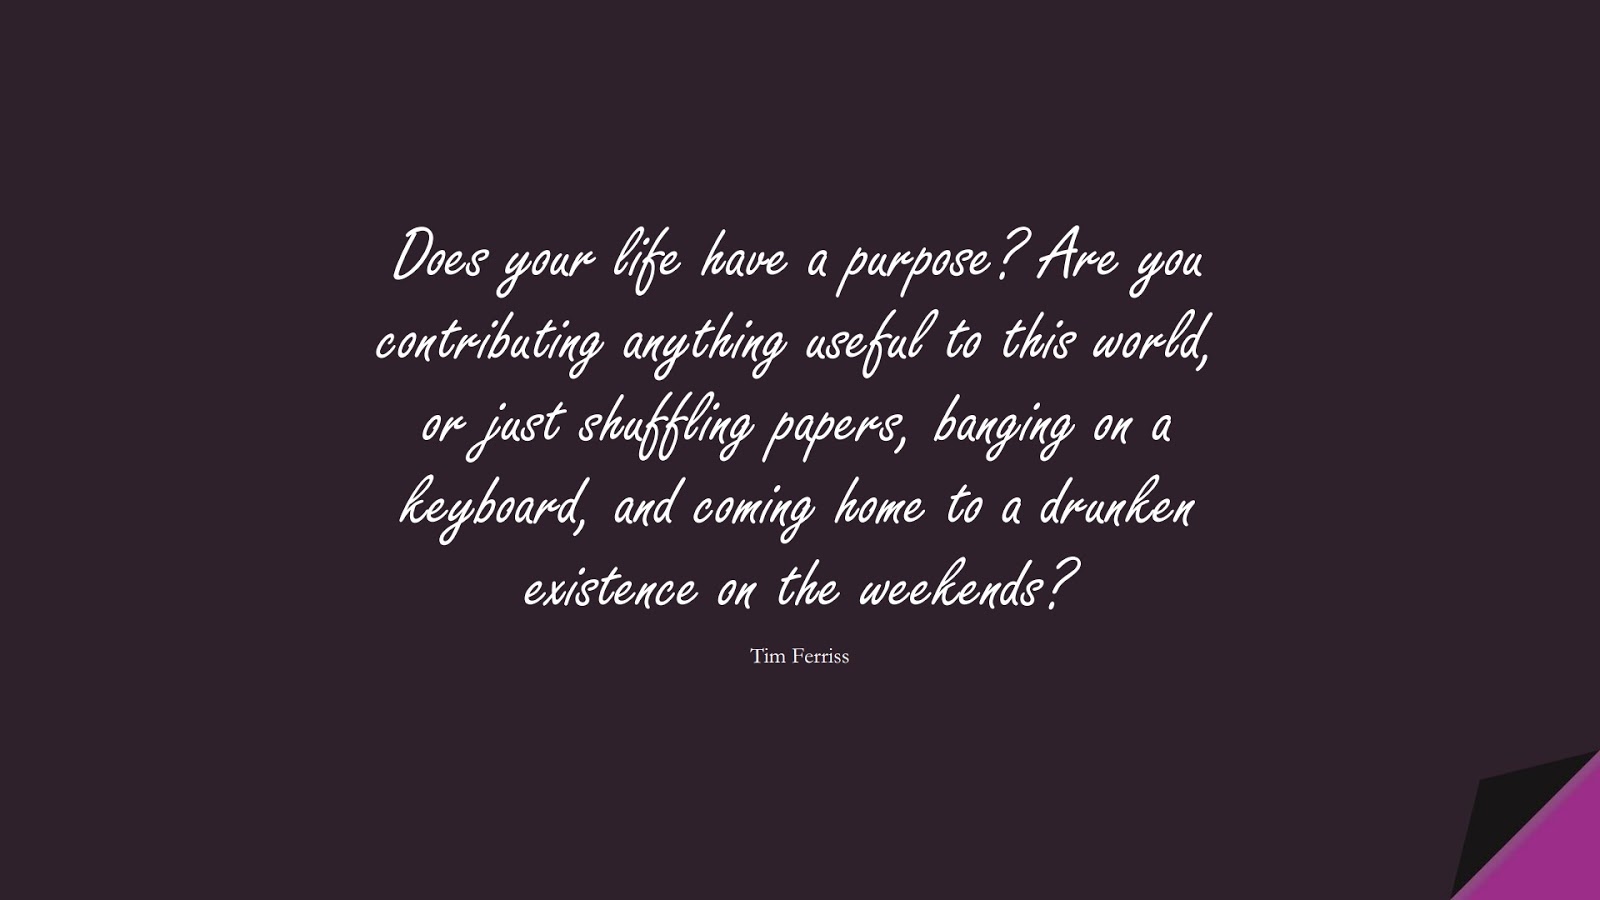 Does your life have a purpose? Are you contributing anything useful to this world, or just shuffling papers, banging on a keyboard, and coming home to a drunken existence on the weekends? (Tim Ferriss);  #TimFerrissQuotes